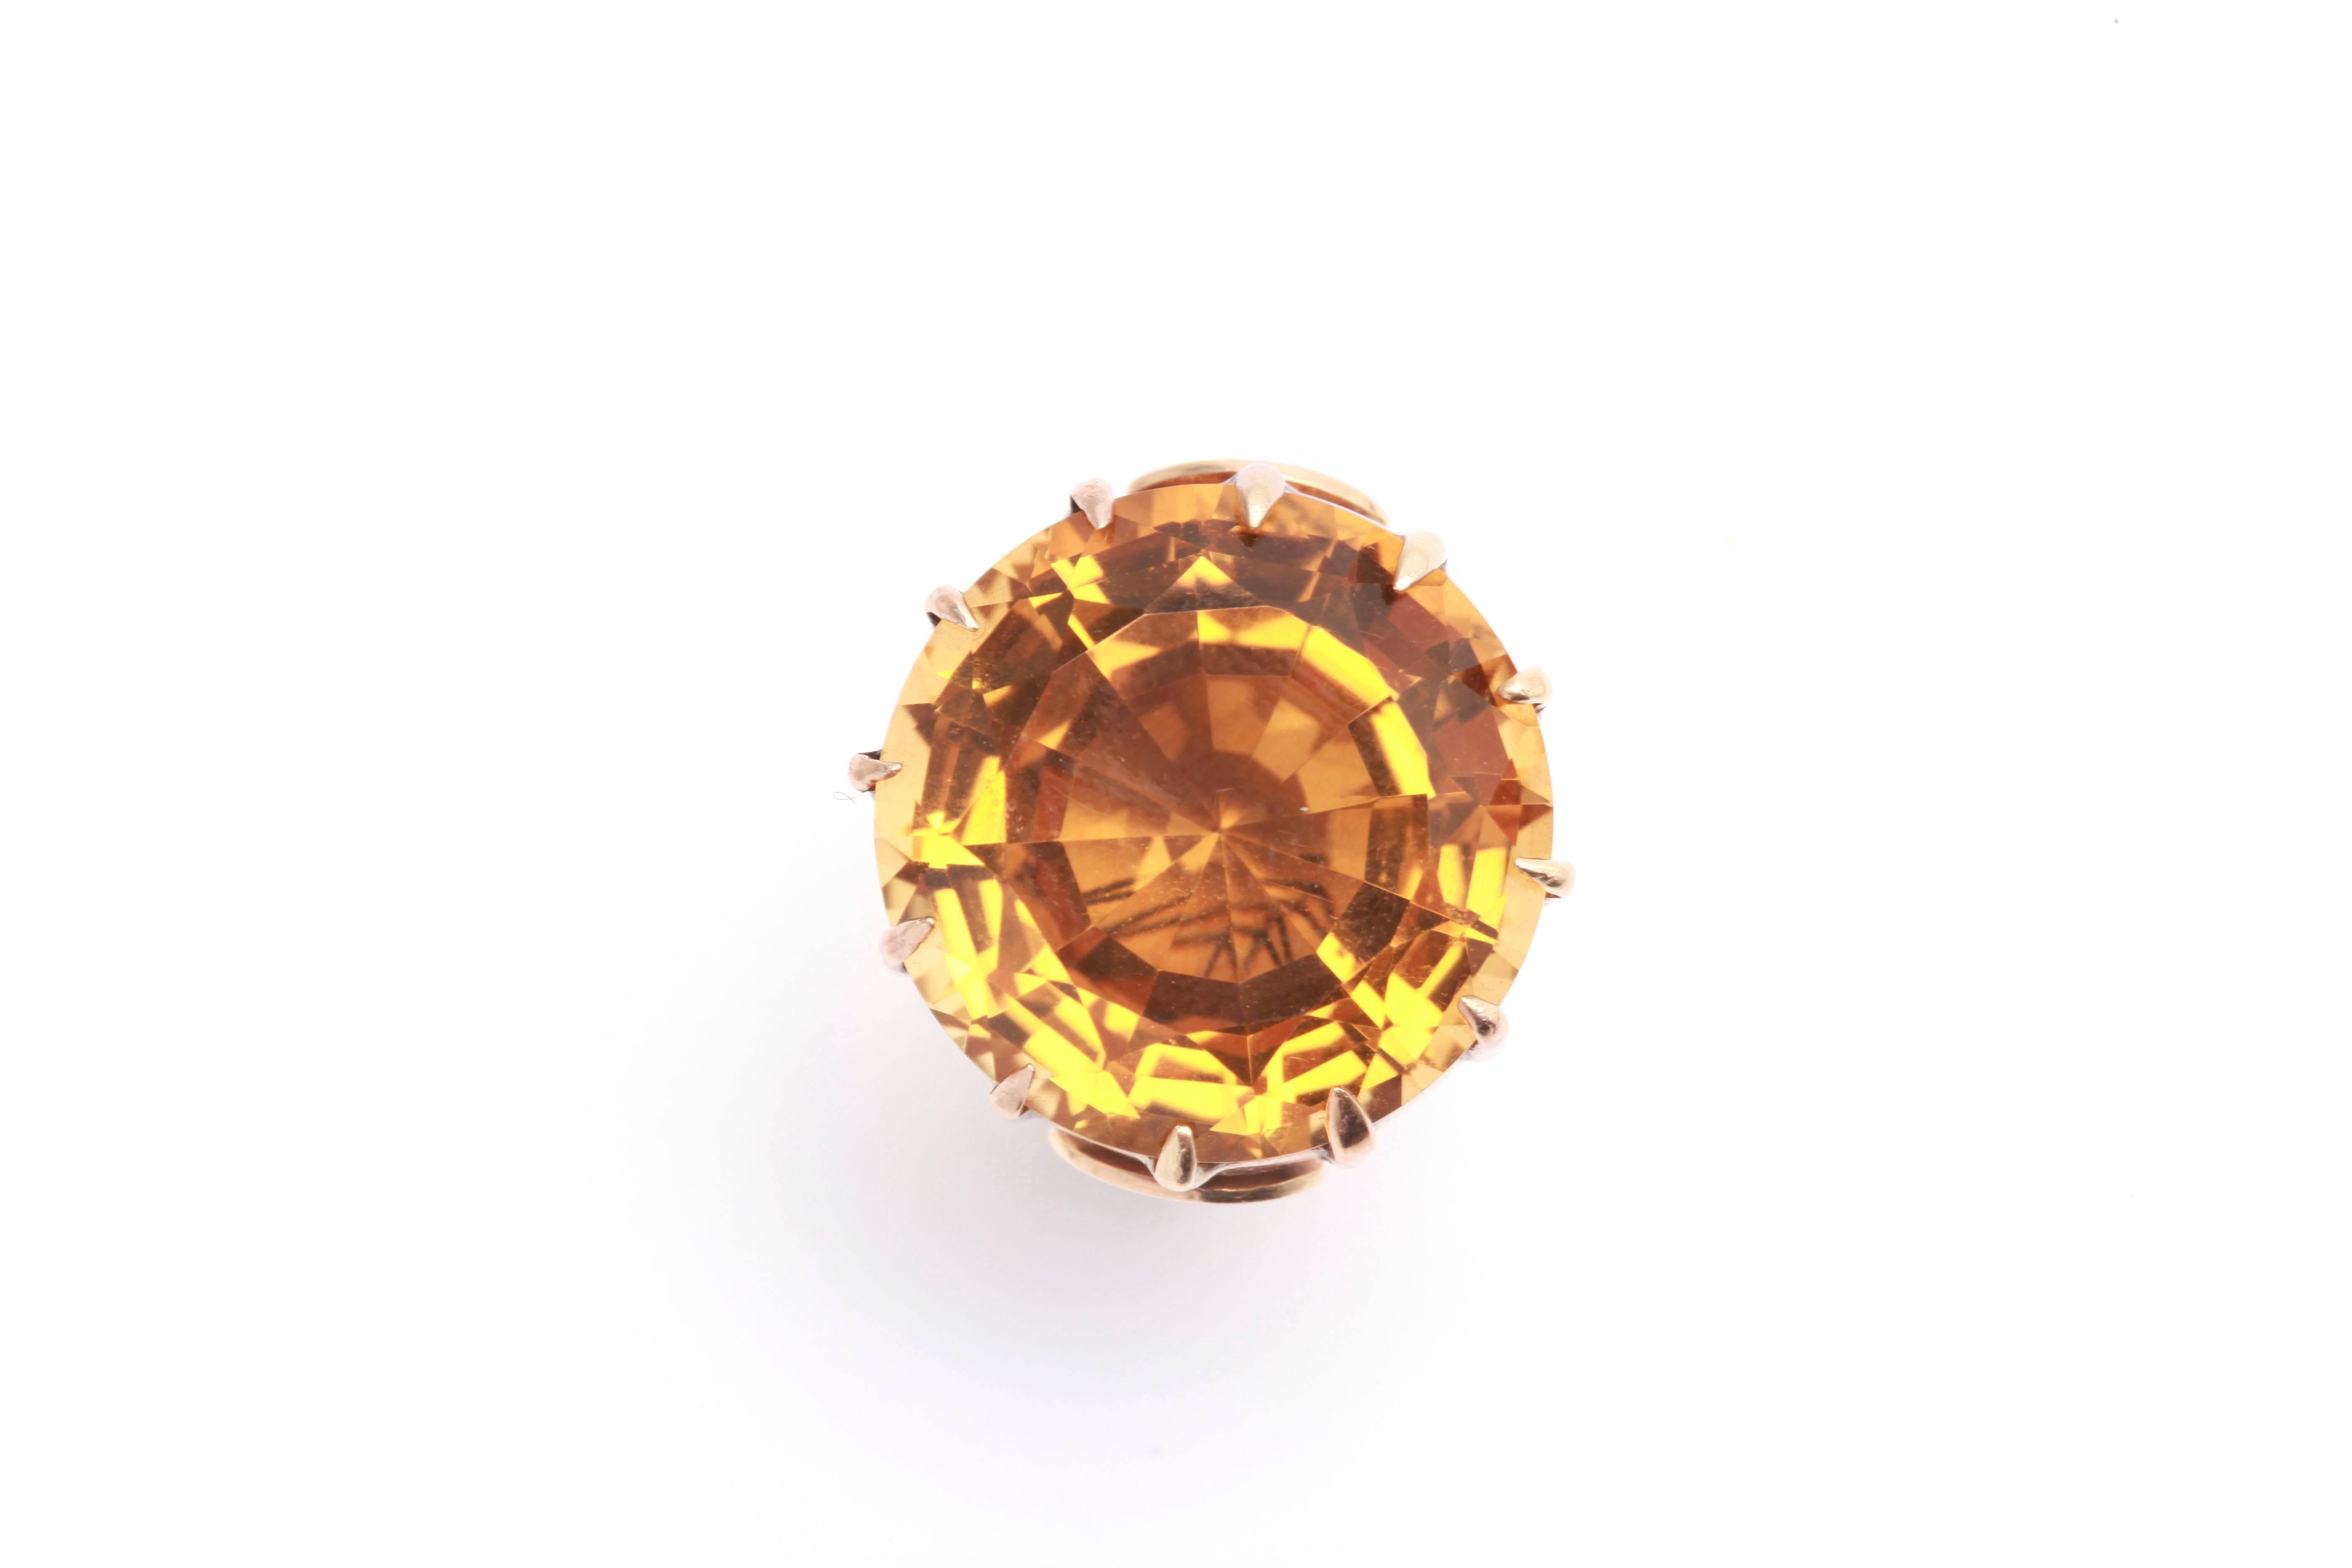 A fun large citrine retro cocktail ring, mounted on 14kt rose gold. Circa 1940

